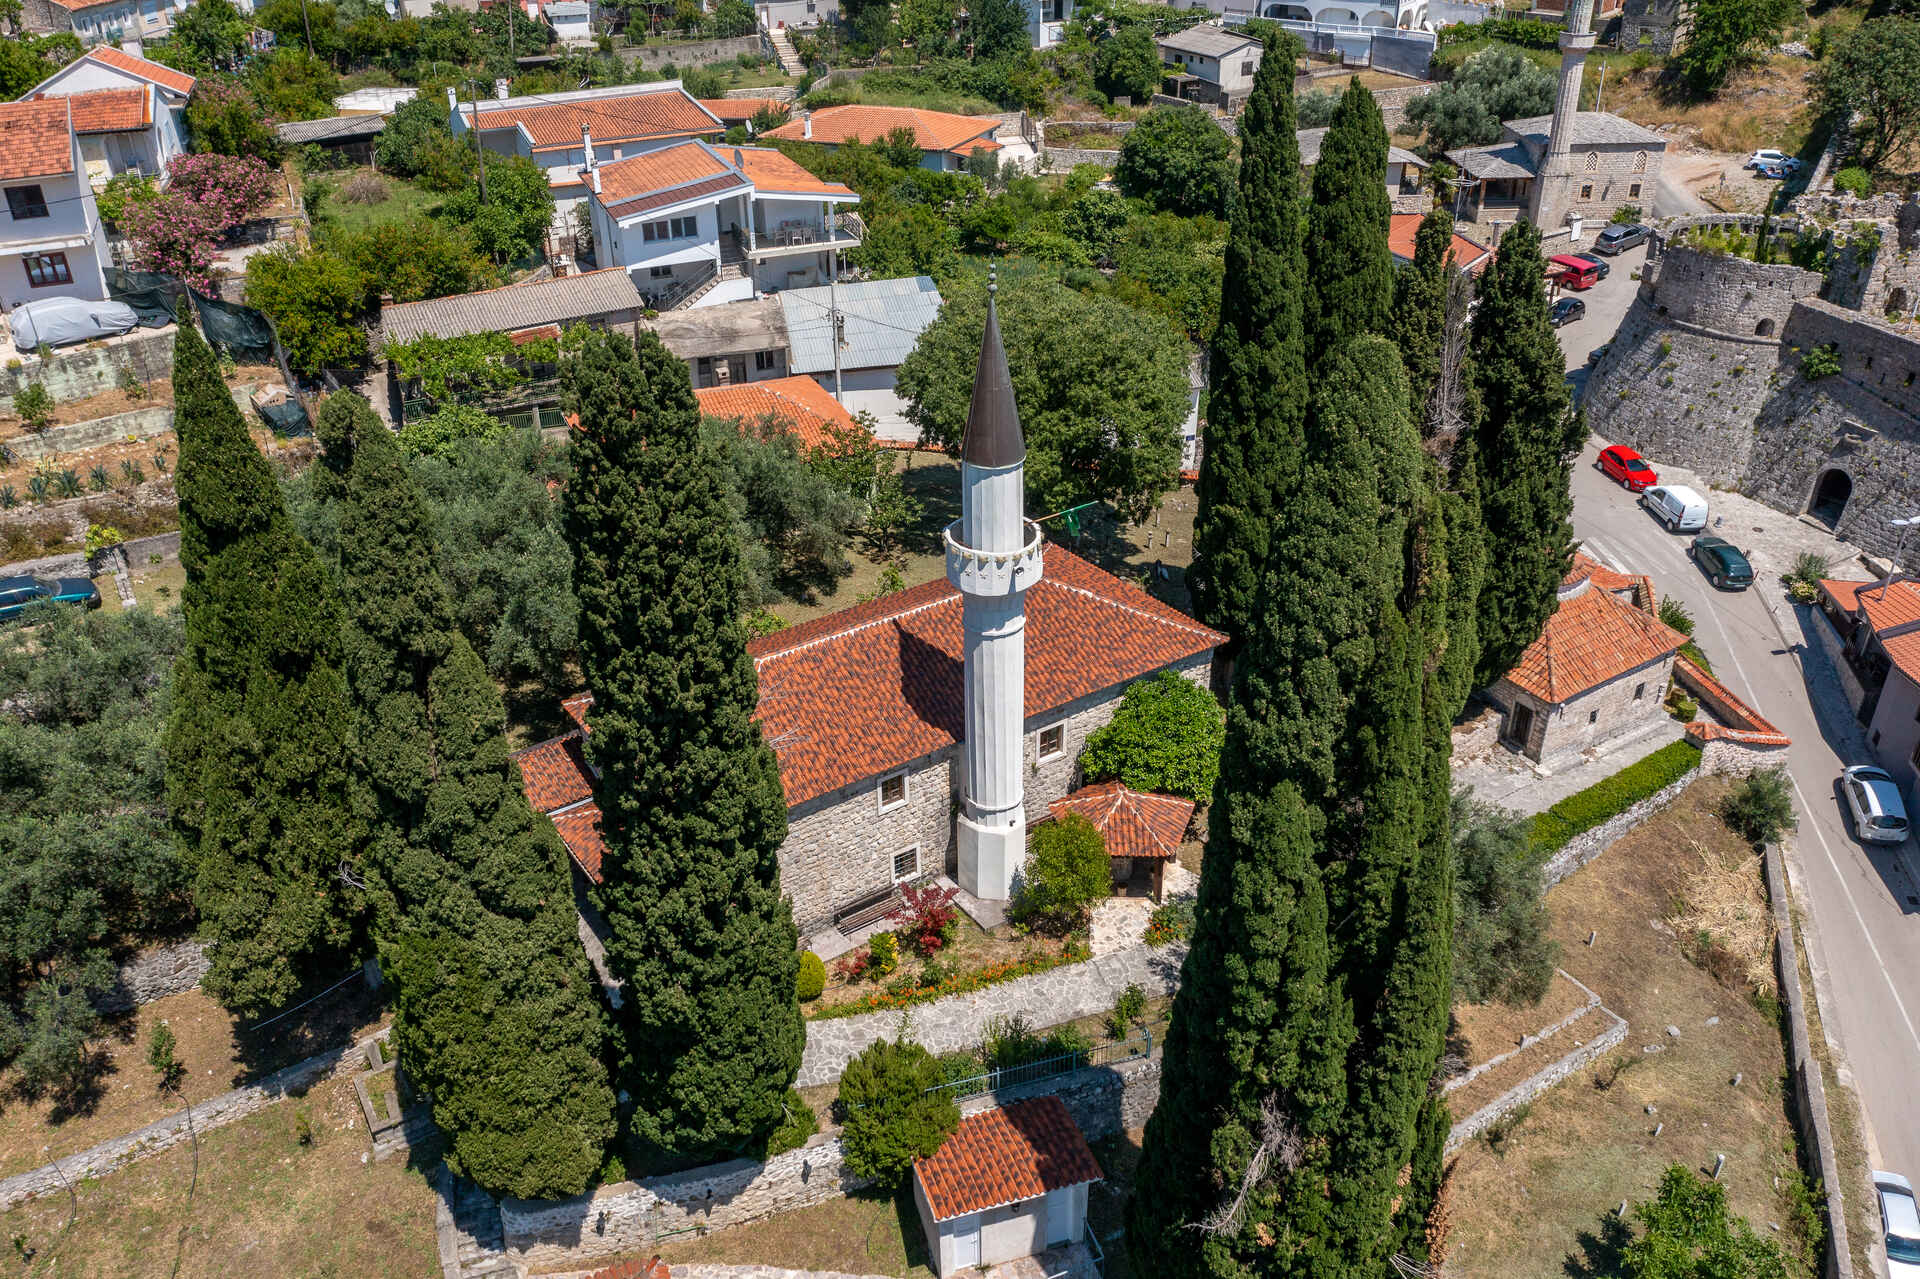 Ottoman cultural heritage of Omerbasic and Skanjevic mosques